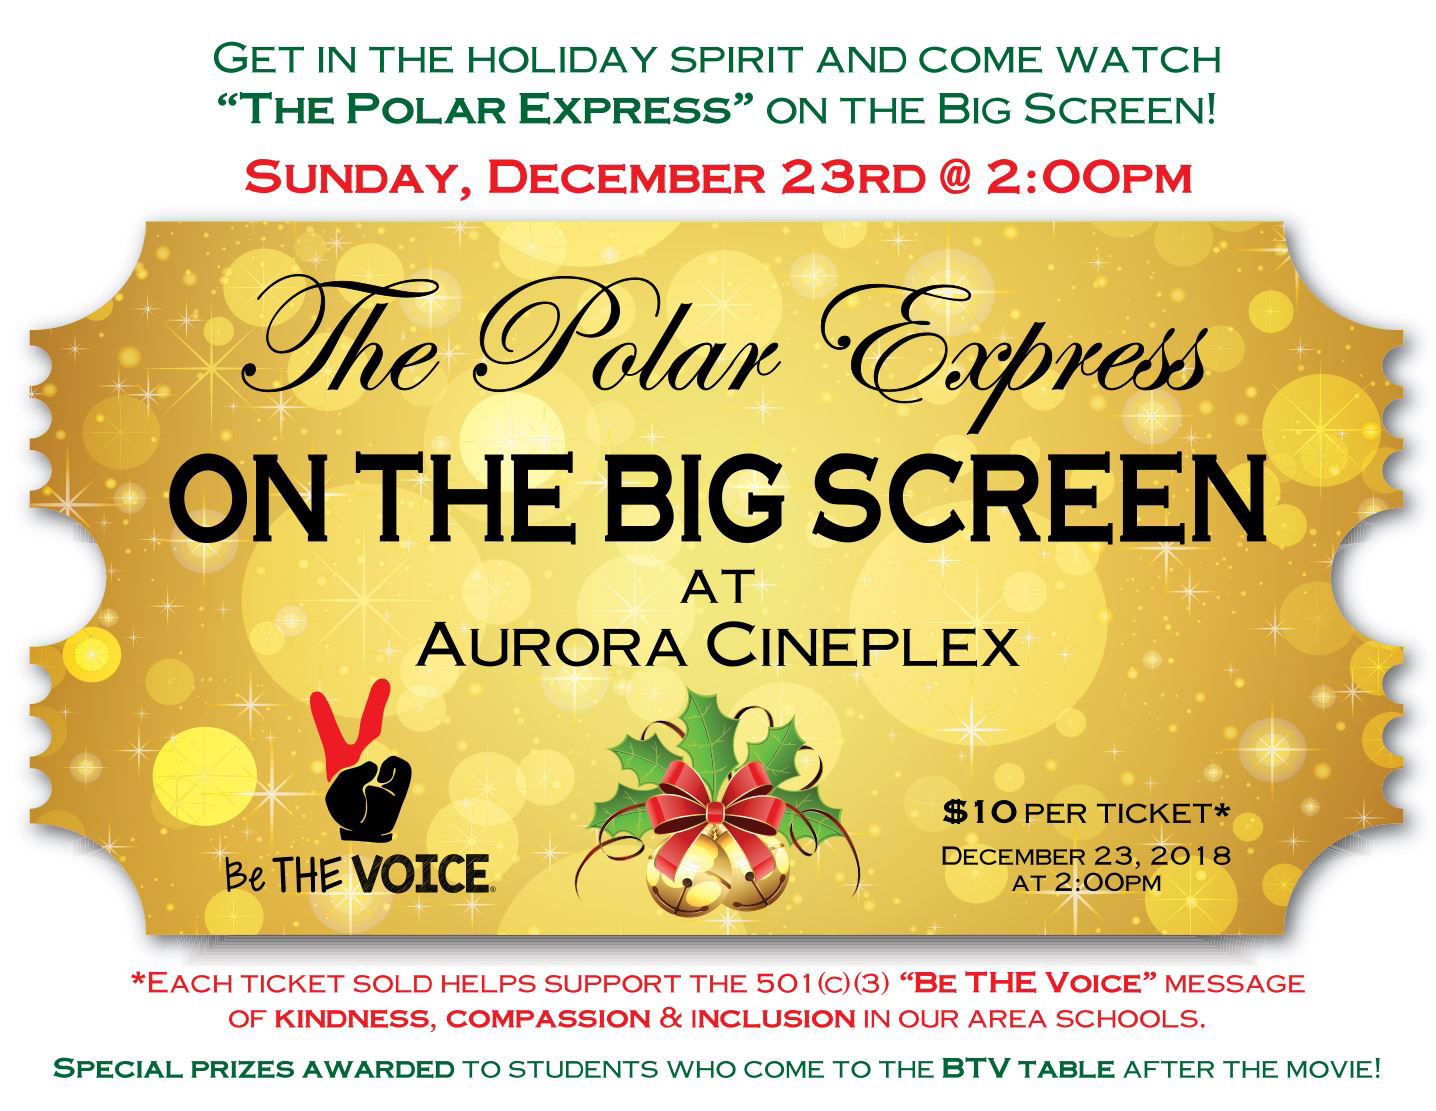 BE THE VOICE AND AURORA CINEPLEX HOST HOLIDAY MOVIE FUNDRAISER